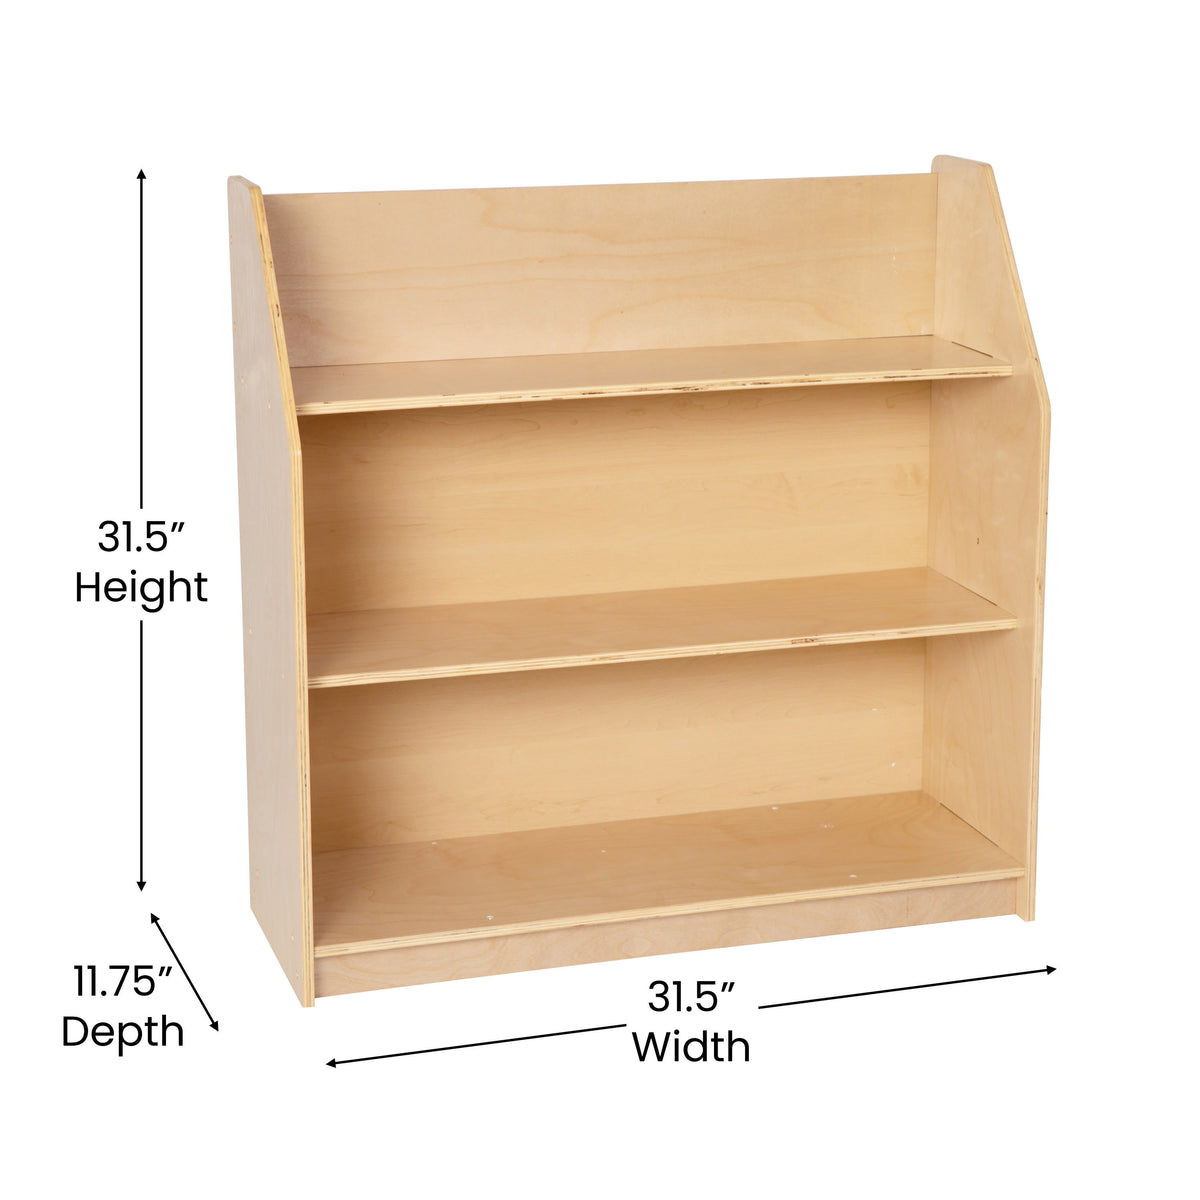 Kid Friendly Wooden Bookshelf in Natural Finish with 3 Display Shelves